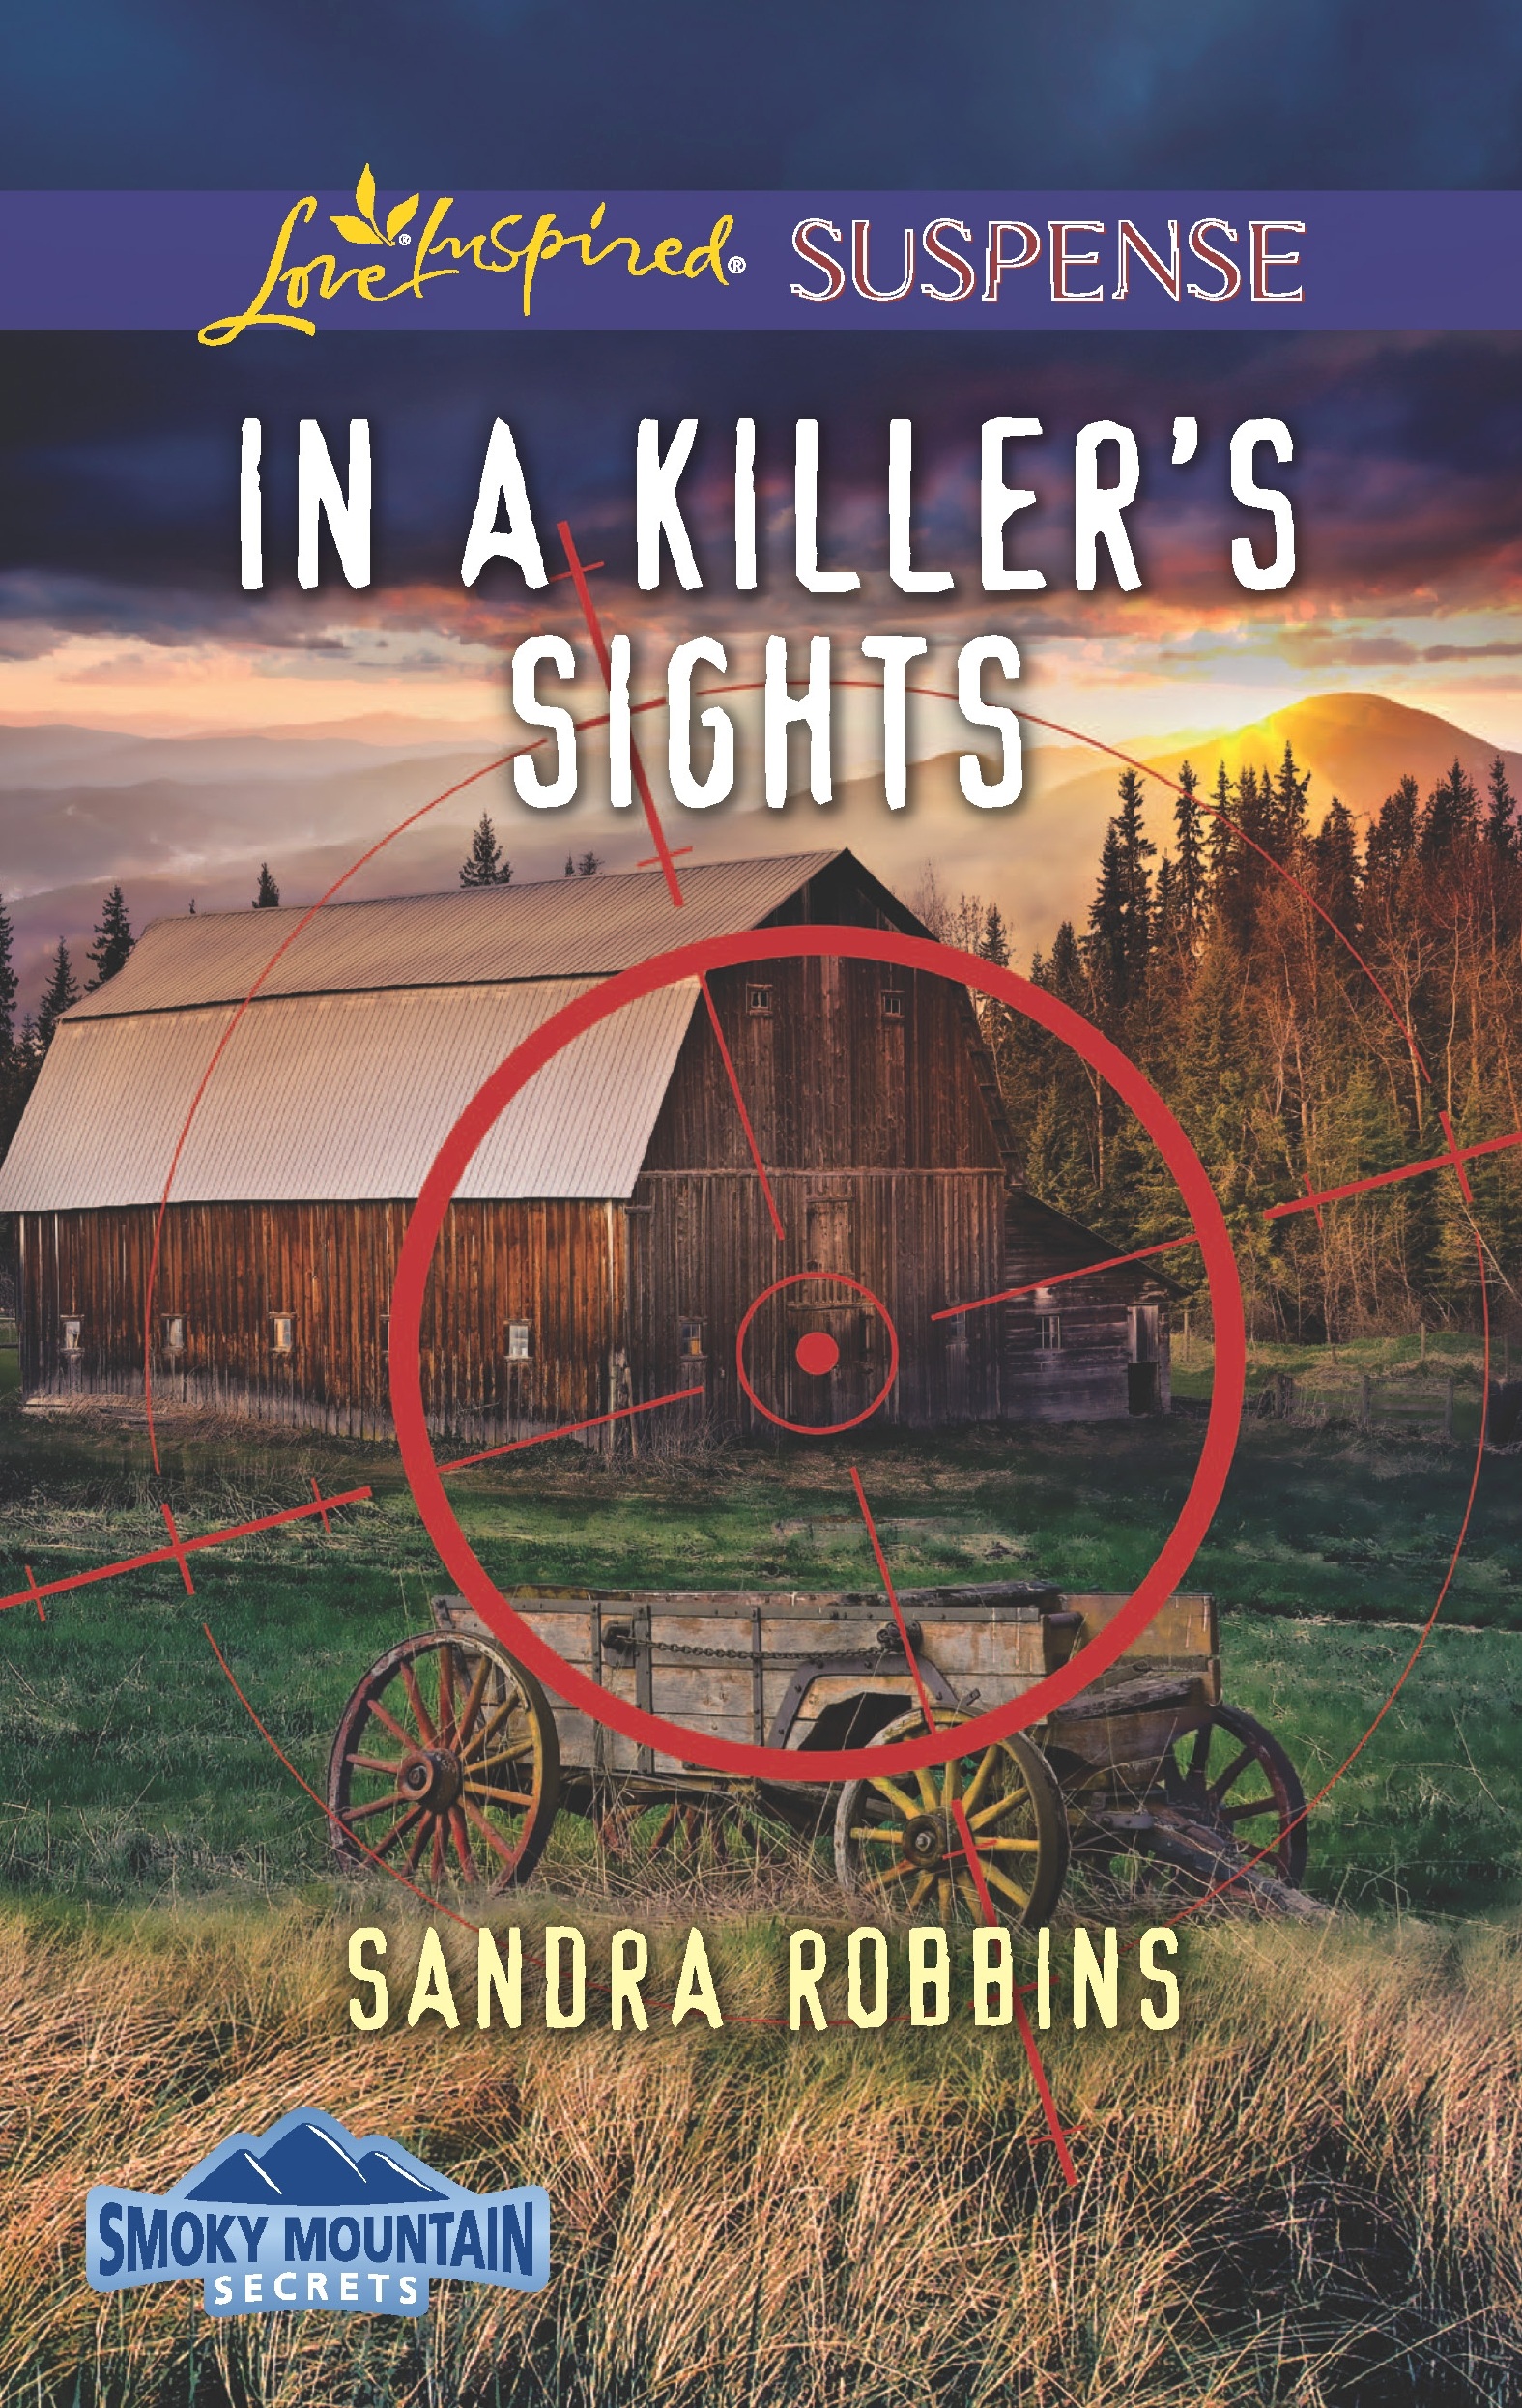 In a Killer’s Sights (2016) by Sandra Robbins